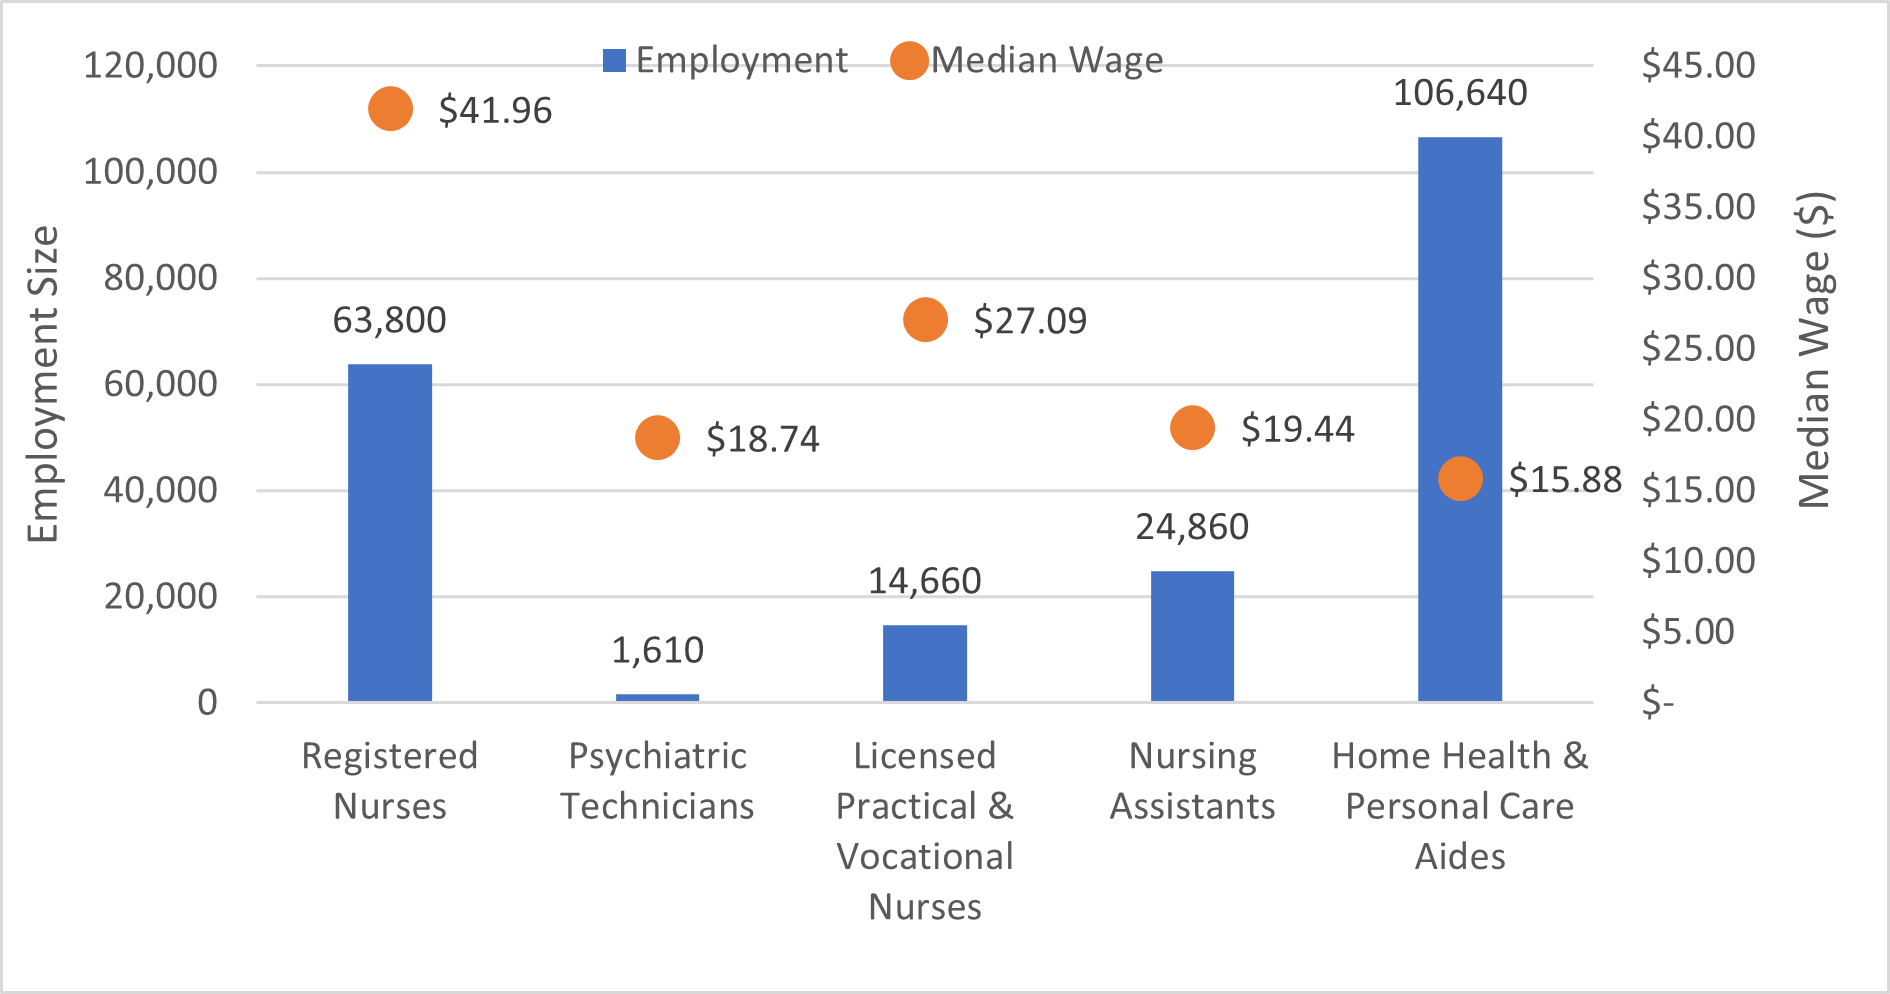 Employment and Median Wages of Direct Care Occupations in Minnesota